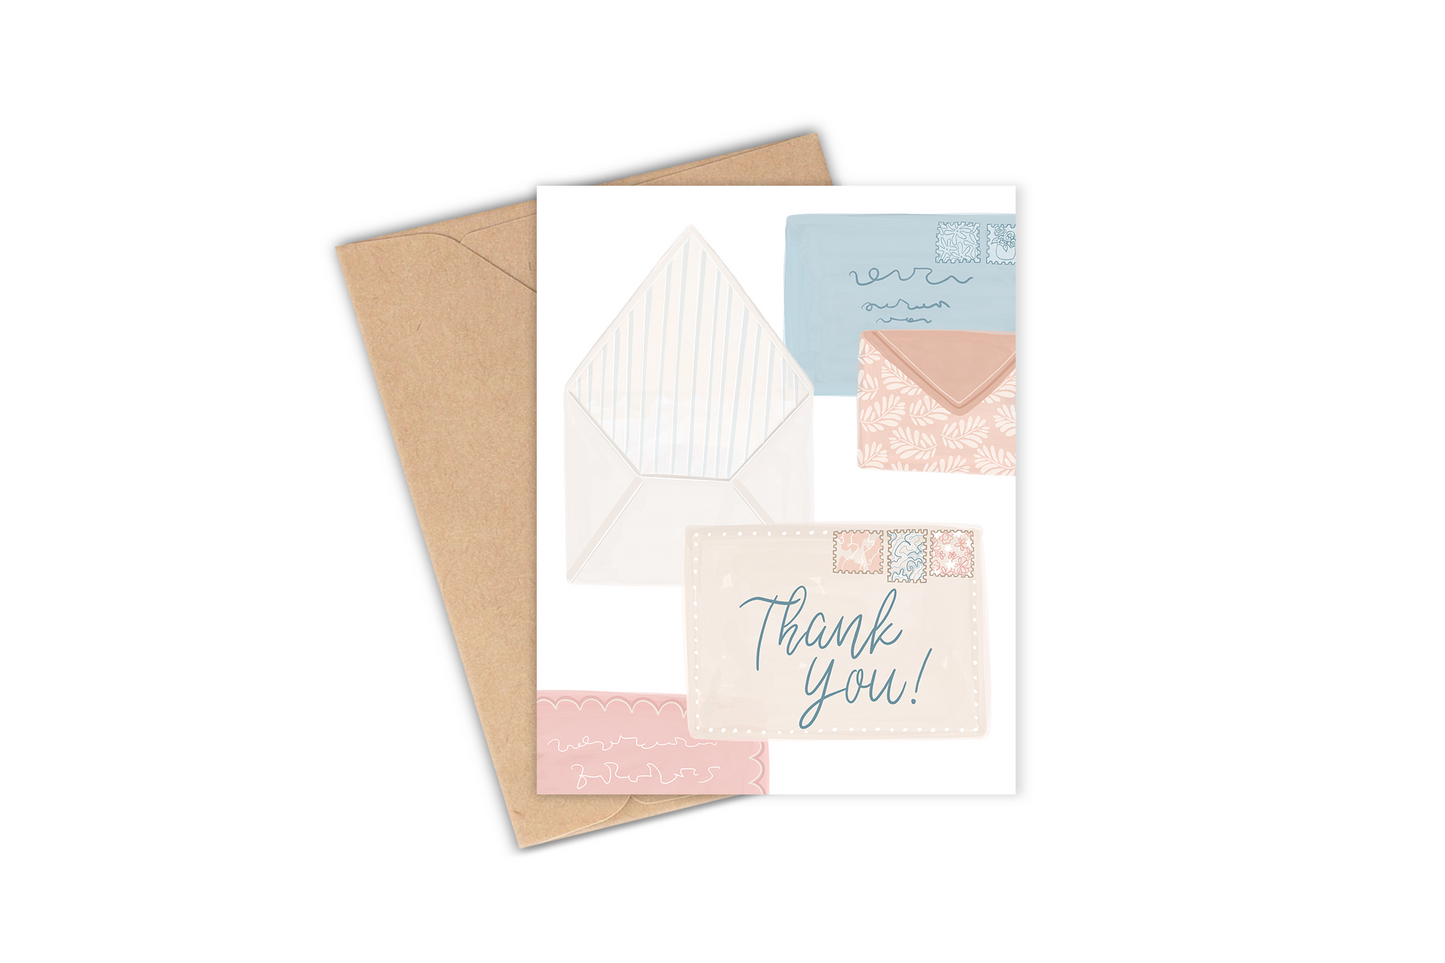 Need to express your gratitude in the most beautiful way? This hand-illustrated thank you stationary card has you covered! It features a lovely drawing of a collection of stationary and envelopes and says "Thank you!". It's perfect for any occasion and would make excellent great post-wedding thank you cards!